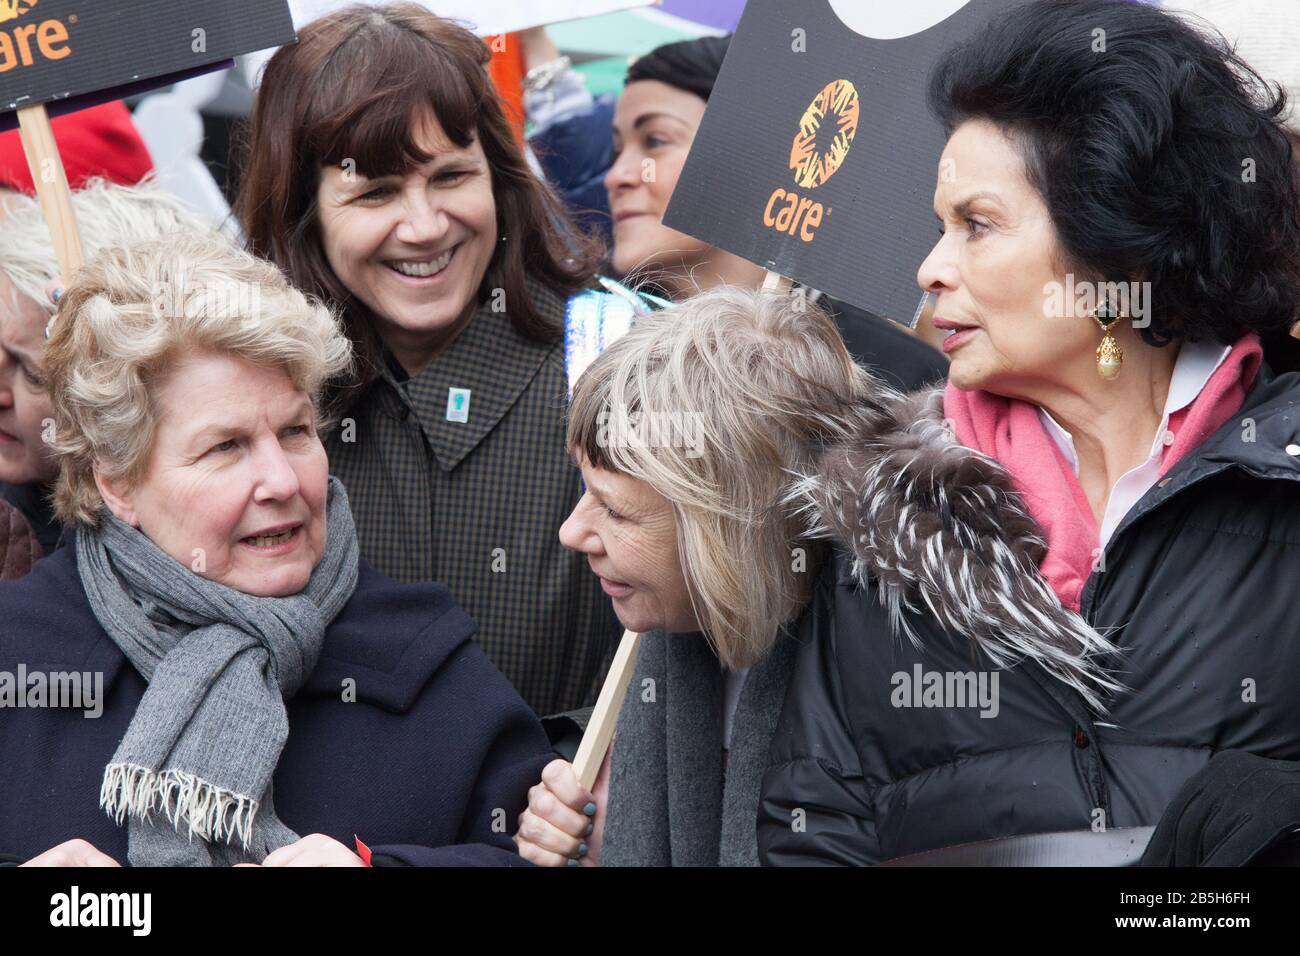 London, UK. 8th Mar 2020. Celebrities, campaigners and politicians joined the March4Women, organised by Care and the Women's Equality Party, to mark International Women's Day. L-R: Sandi Toksvig, Catherine Mayer, Jude Kelly and Bianca Jagger. Anna Watson/Alamy Live News Stock Photo